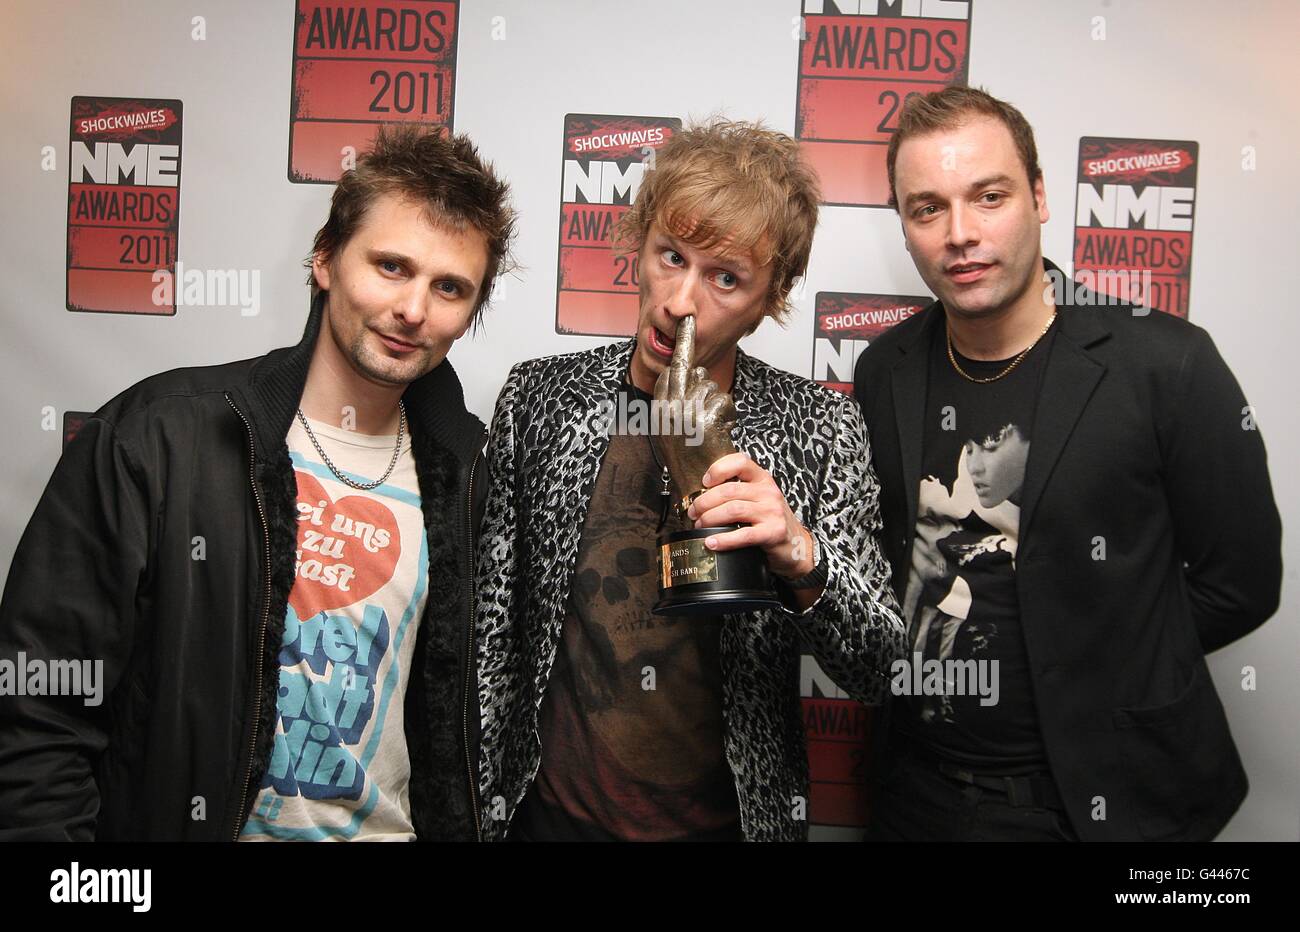 Muse with the Hottest Man award, awarded to Matt Bellamy during the 2011 NME Awards at the O2 Academy, Brixton, London Stock Photo